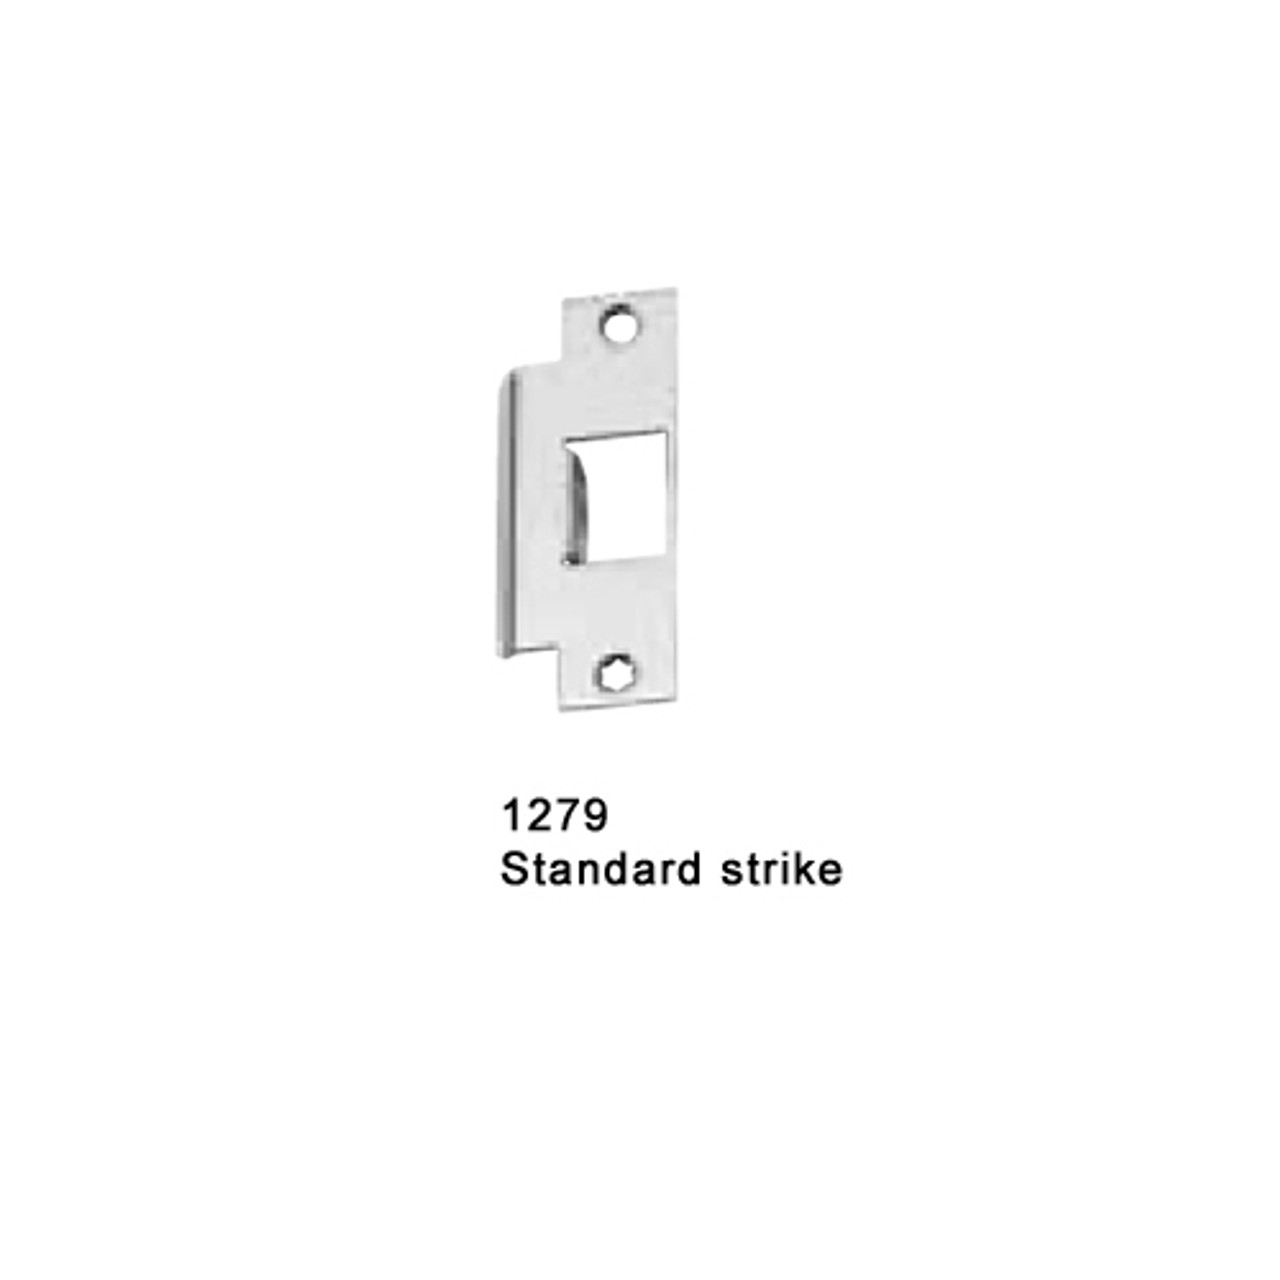 F-25-M-L-DT-Dane-US15-3-RHR Falcon 25 Series Fire Rated Mortise Lock Devices 510L-DT Dane Lever Trim with Dummy Trim in Satin Nickel